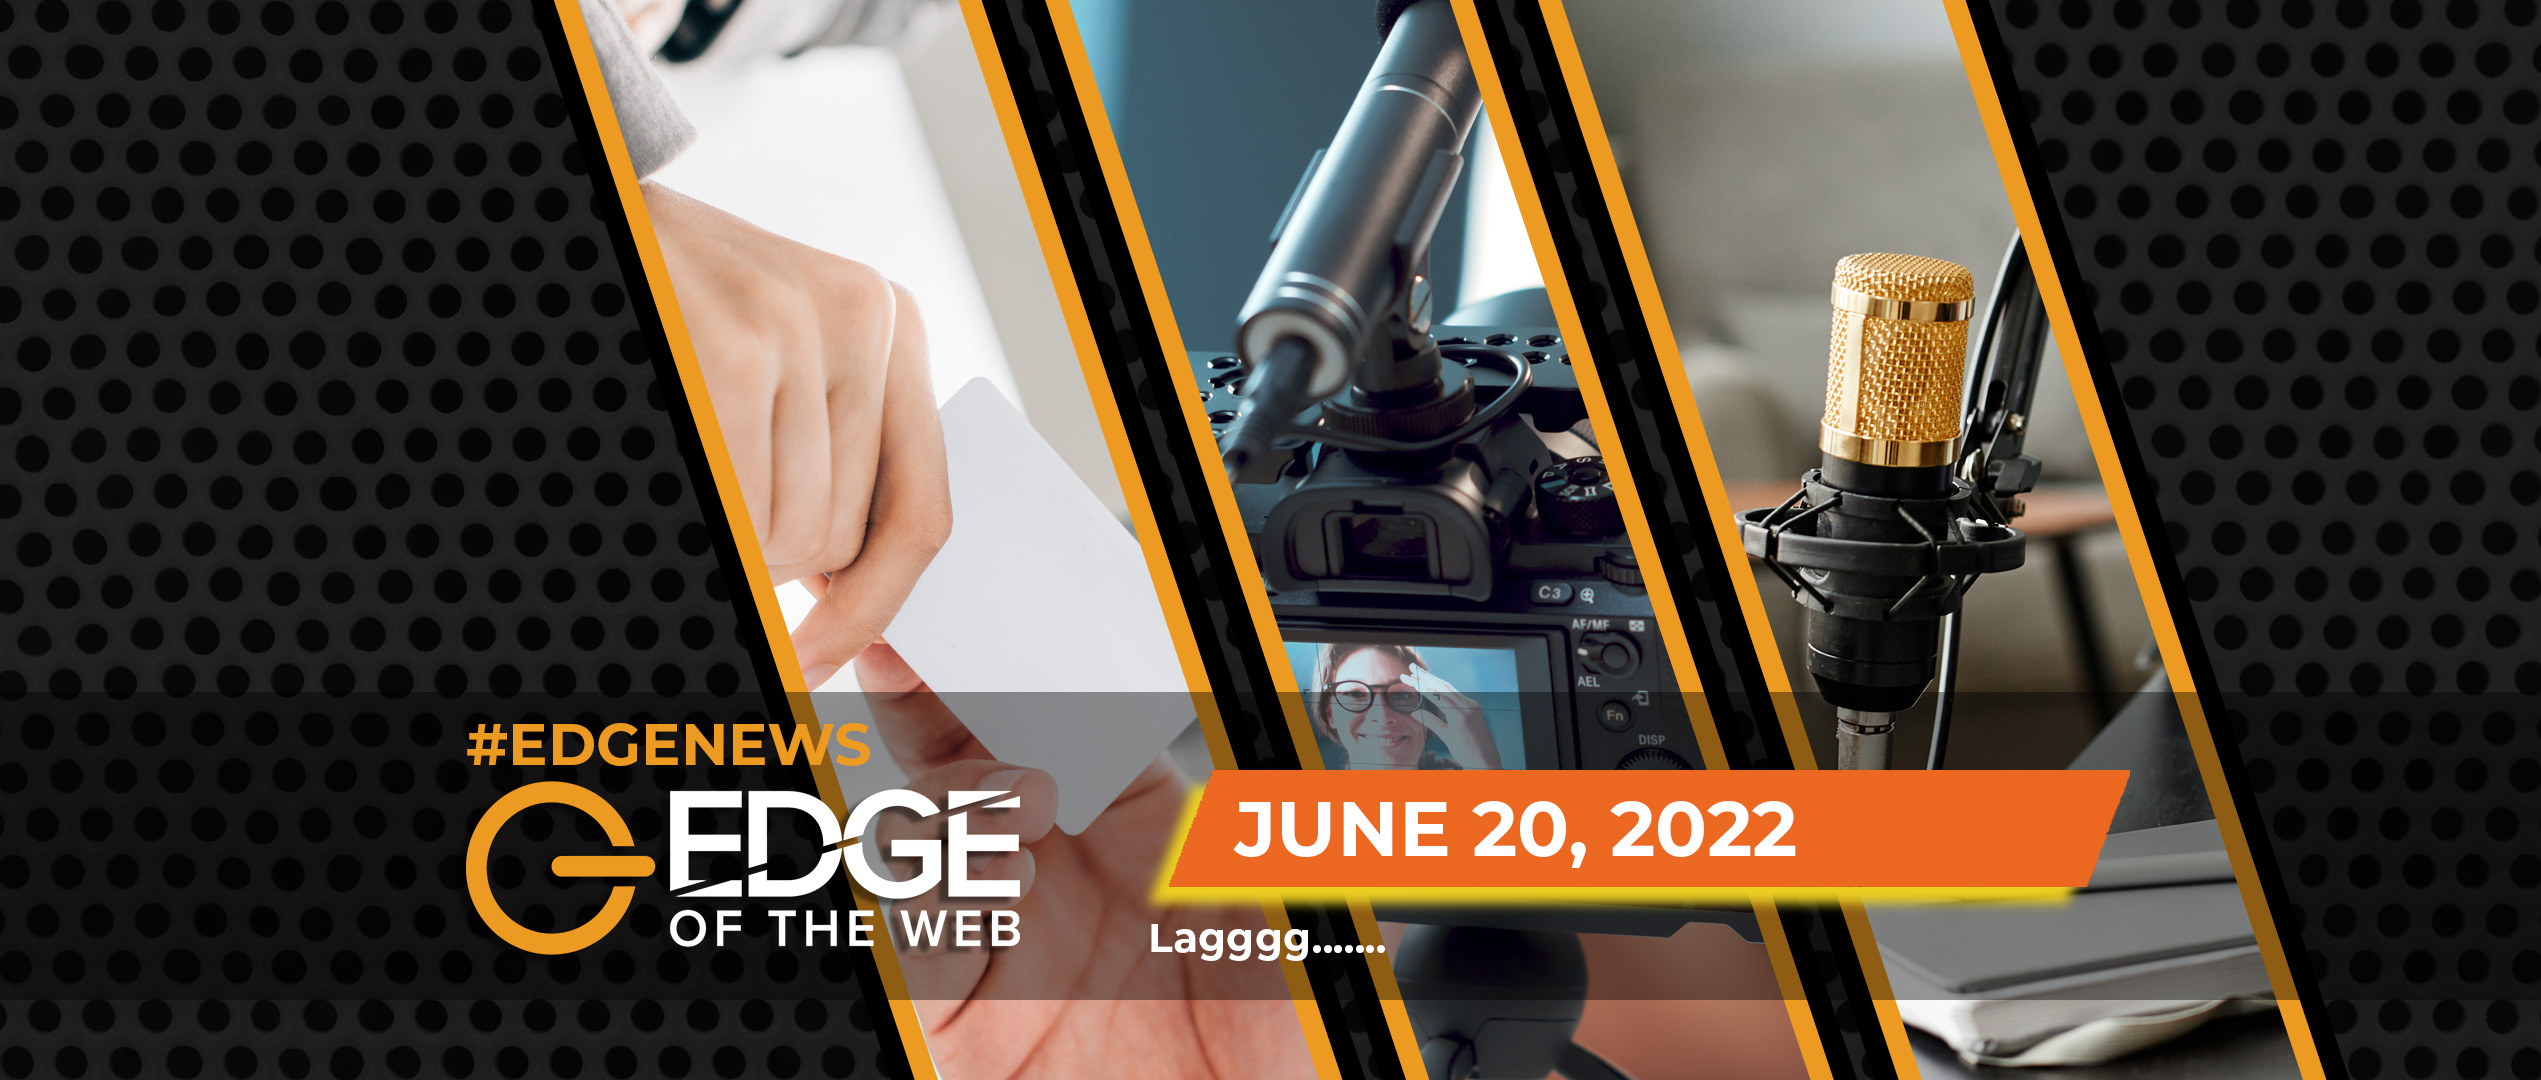 509 | News from the EDGE | Week of 6.20.2022